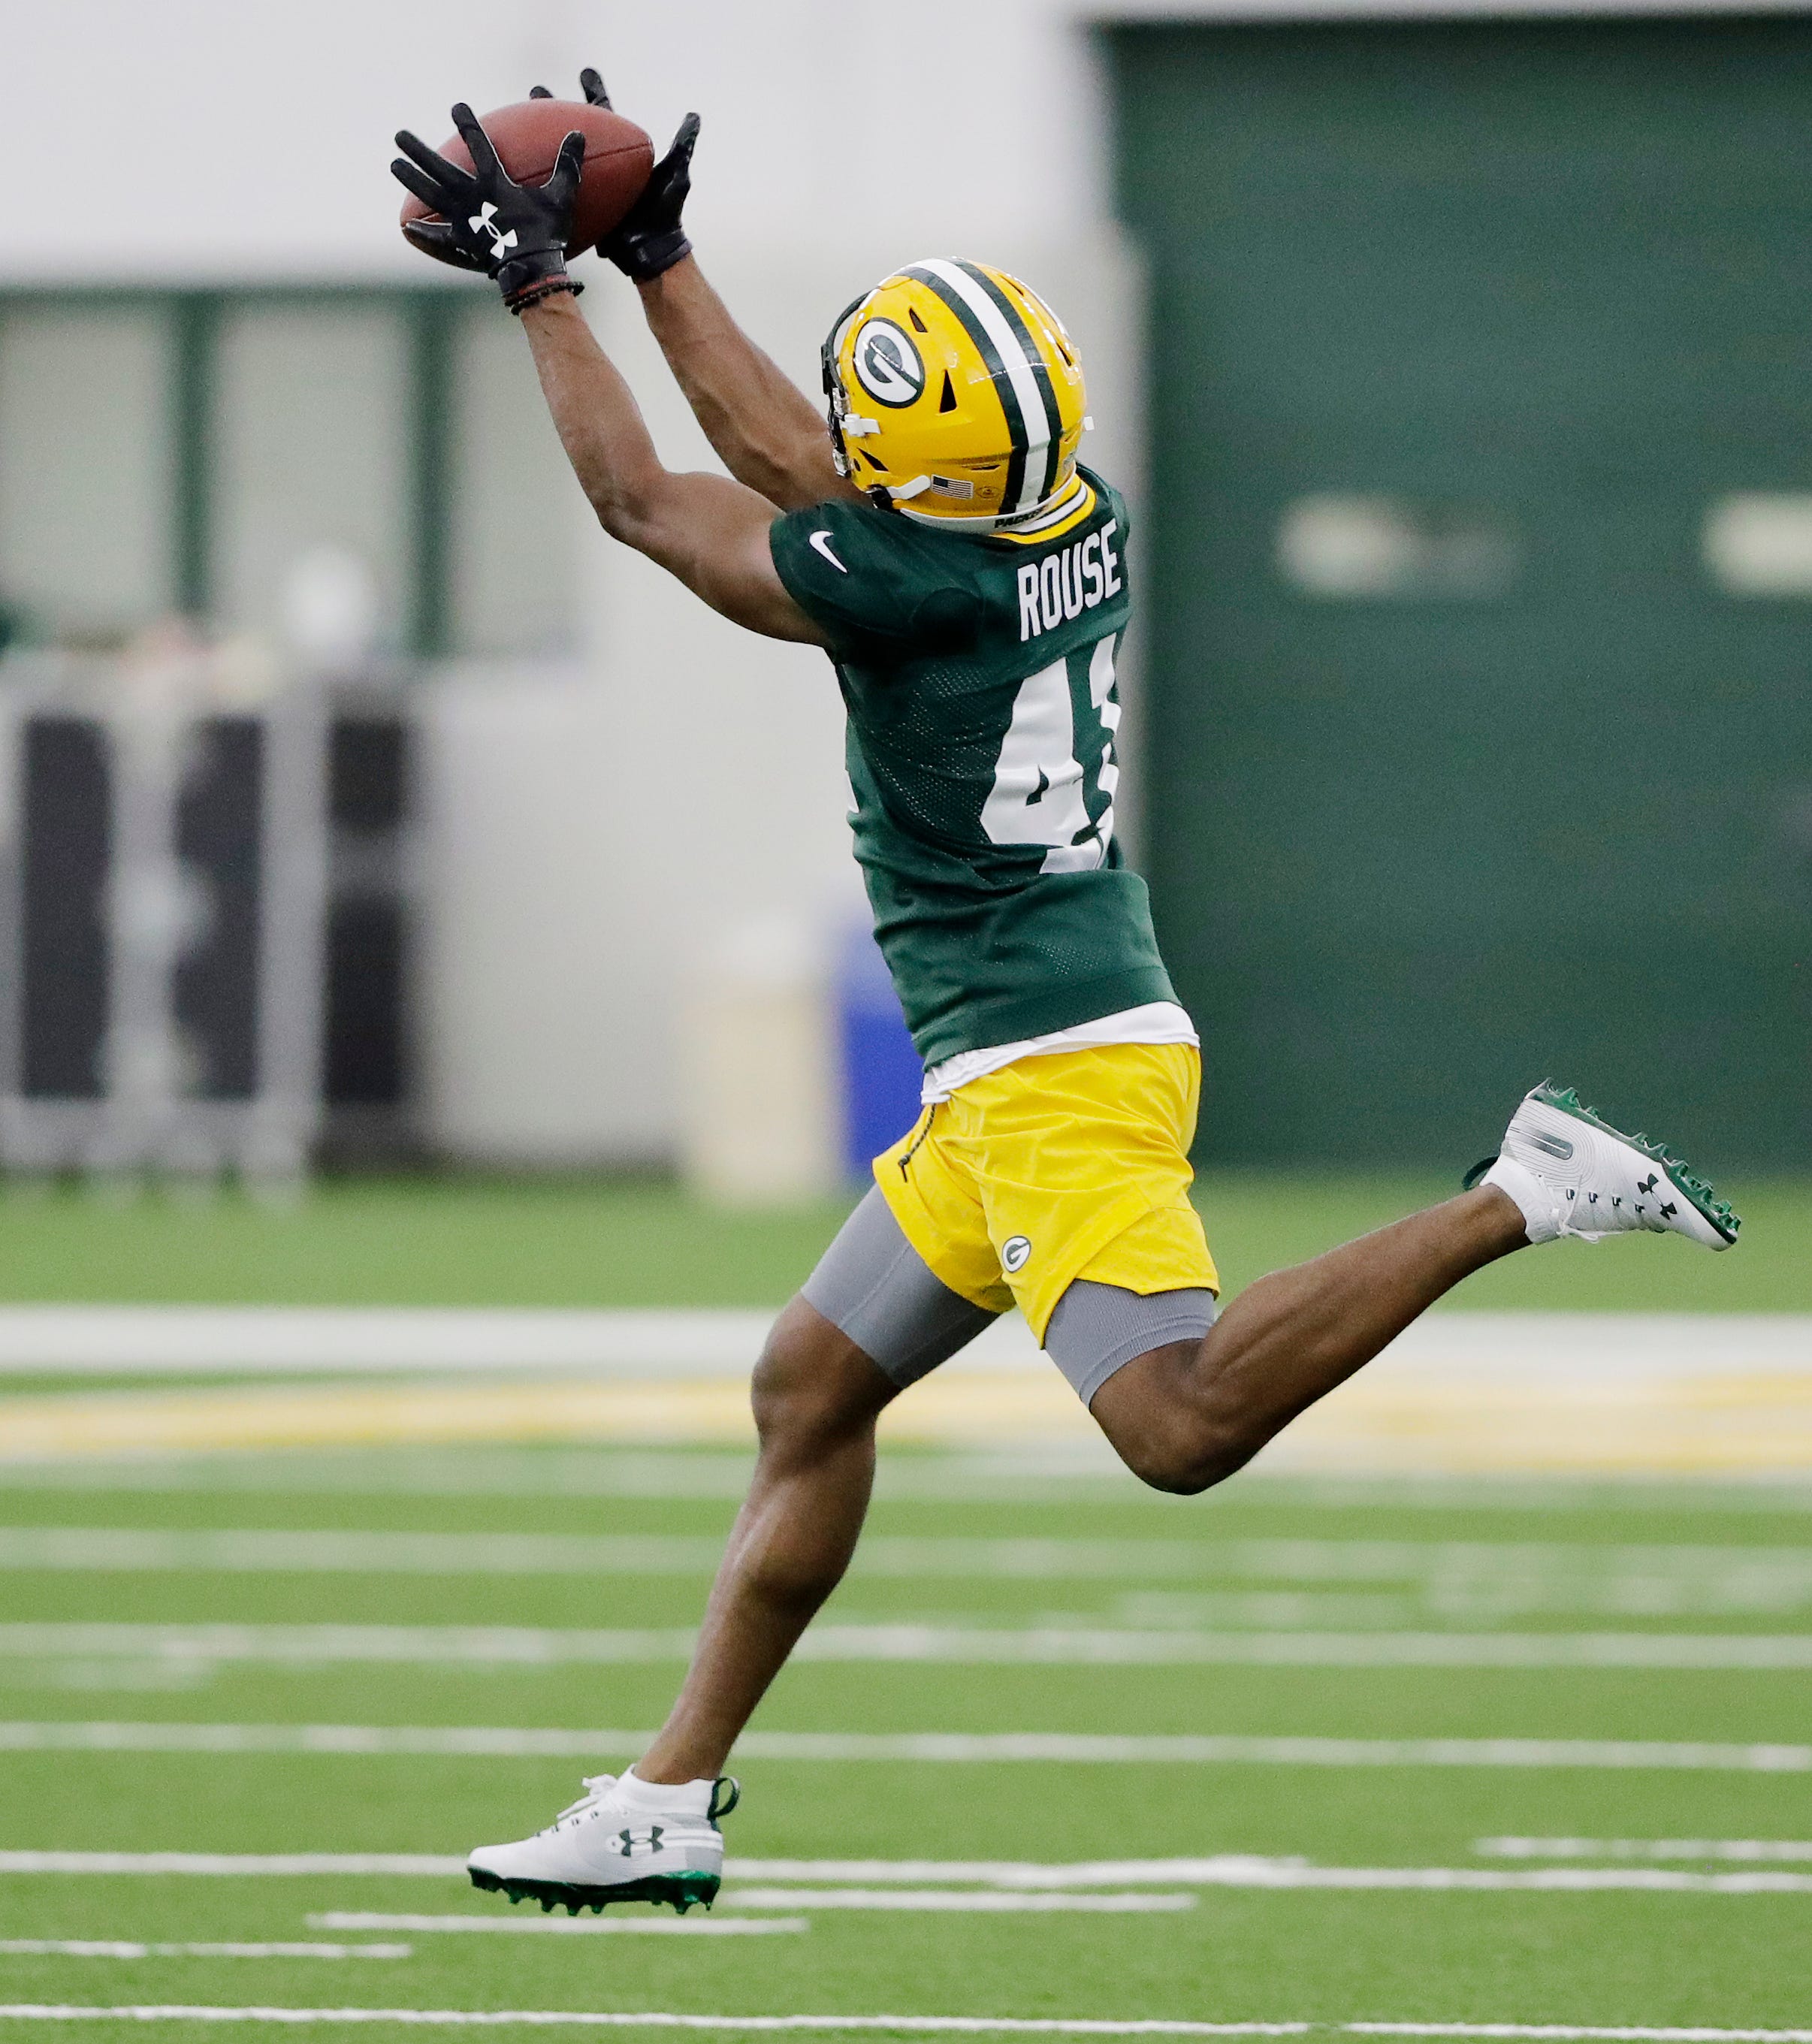 Green Bay Packers cornerback Nydair Rouse (41) during practice at rookie minicamp at the Don Hutson Center on Friday, May 3, 2019 in Ashwaubenon, Wis.
Adam Wesley/USA TODAY NETWORK-Wis